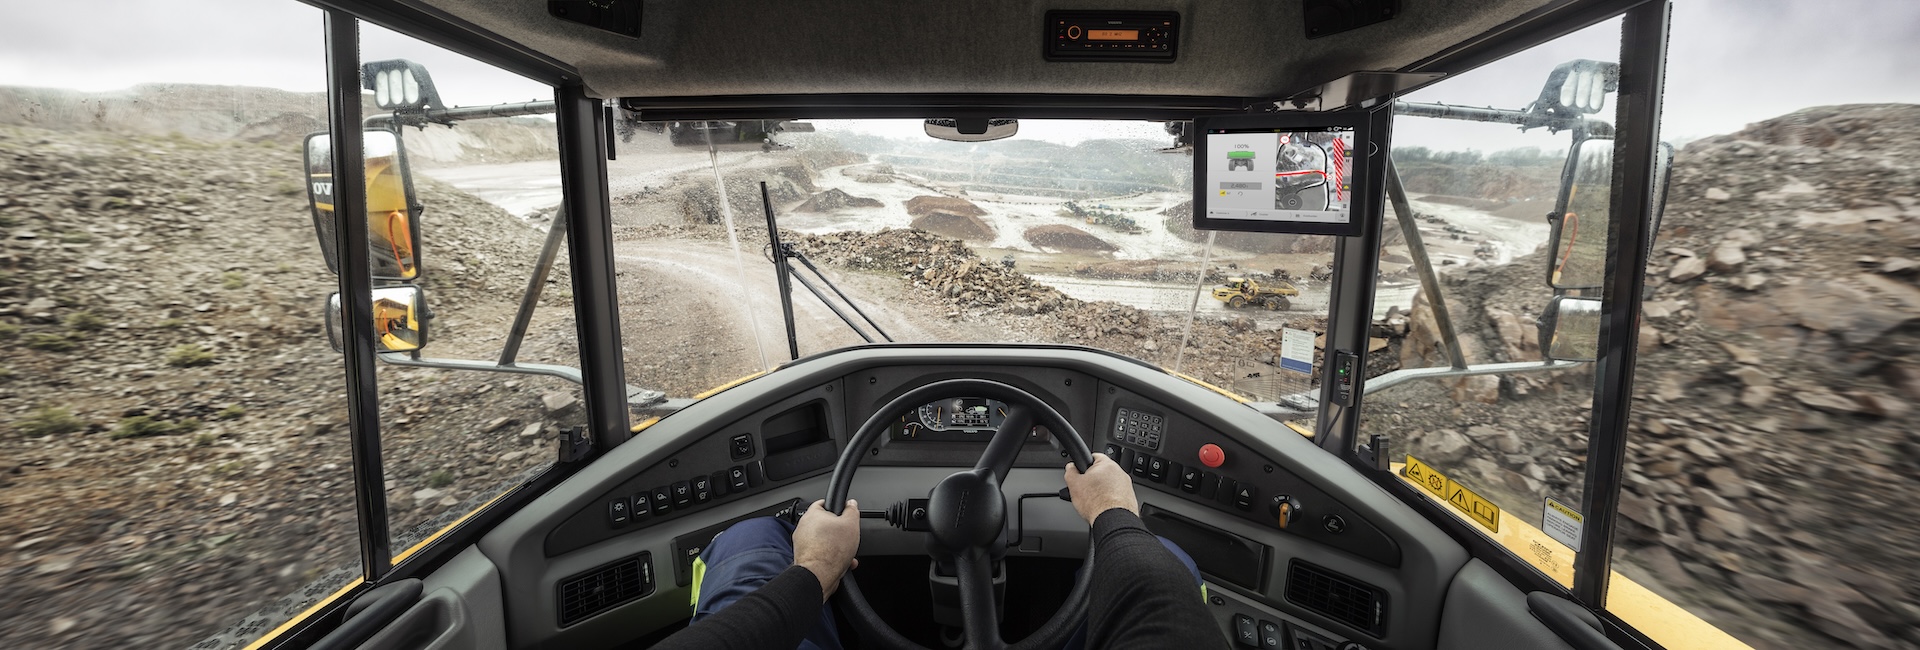 A view of a quarry from a Volvo articulated hauler operator’s perspective. The Haul Assist in-cab display can be seen on the right side of the cab.